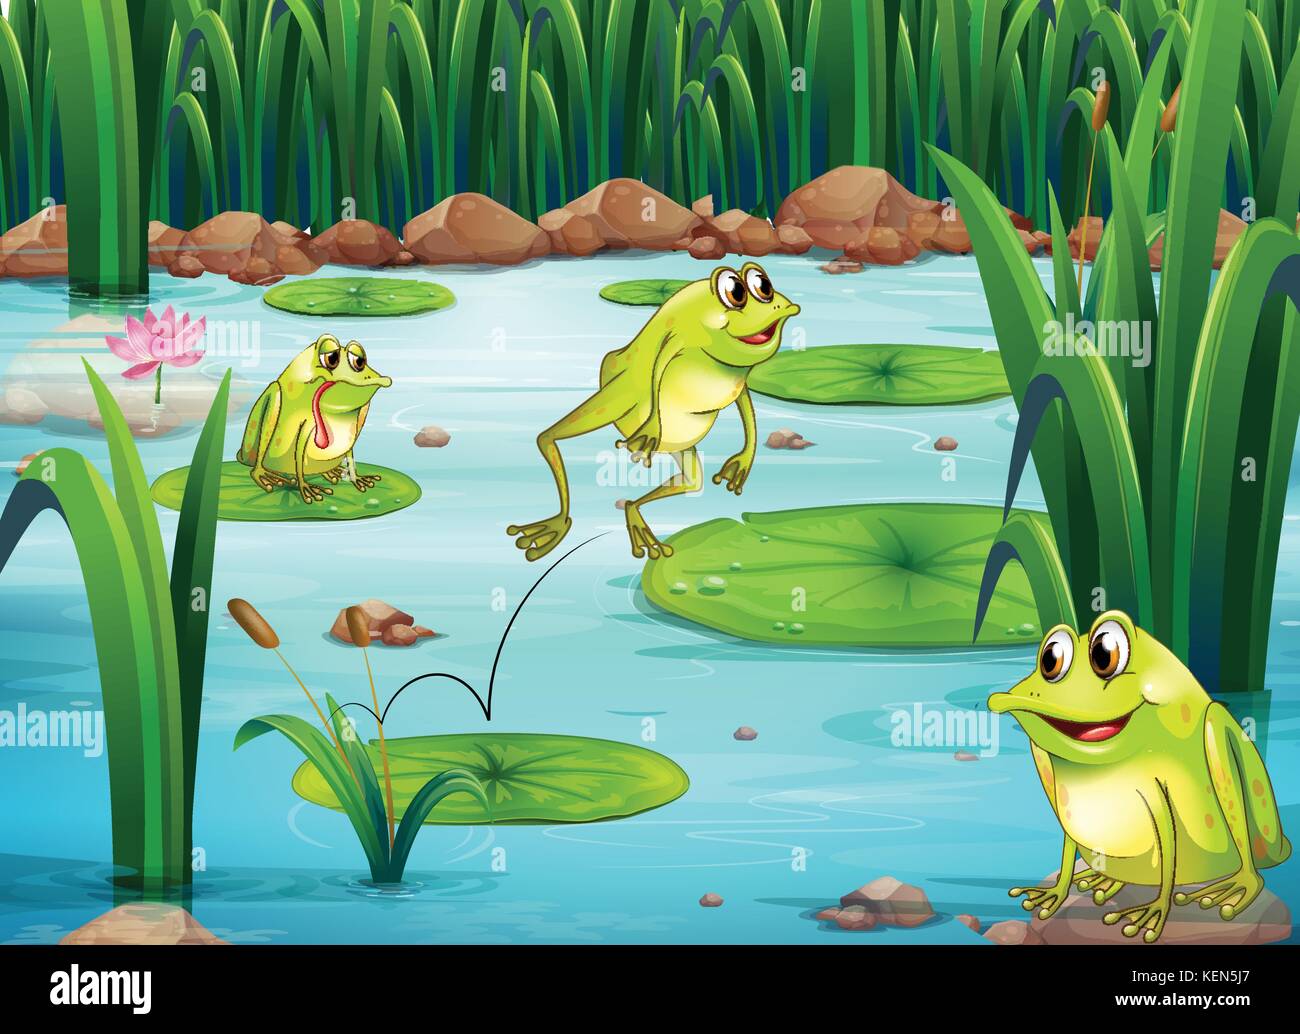 Illustration of many frogs in the pond Stock Vector